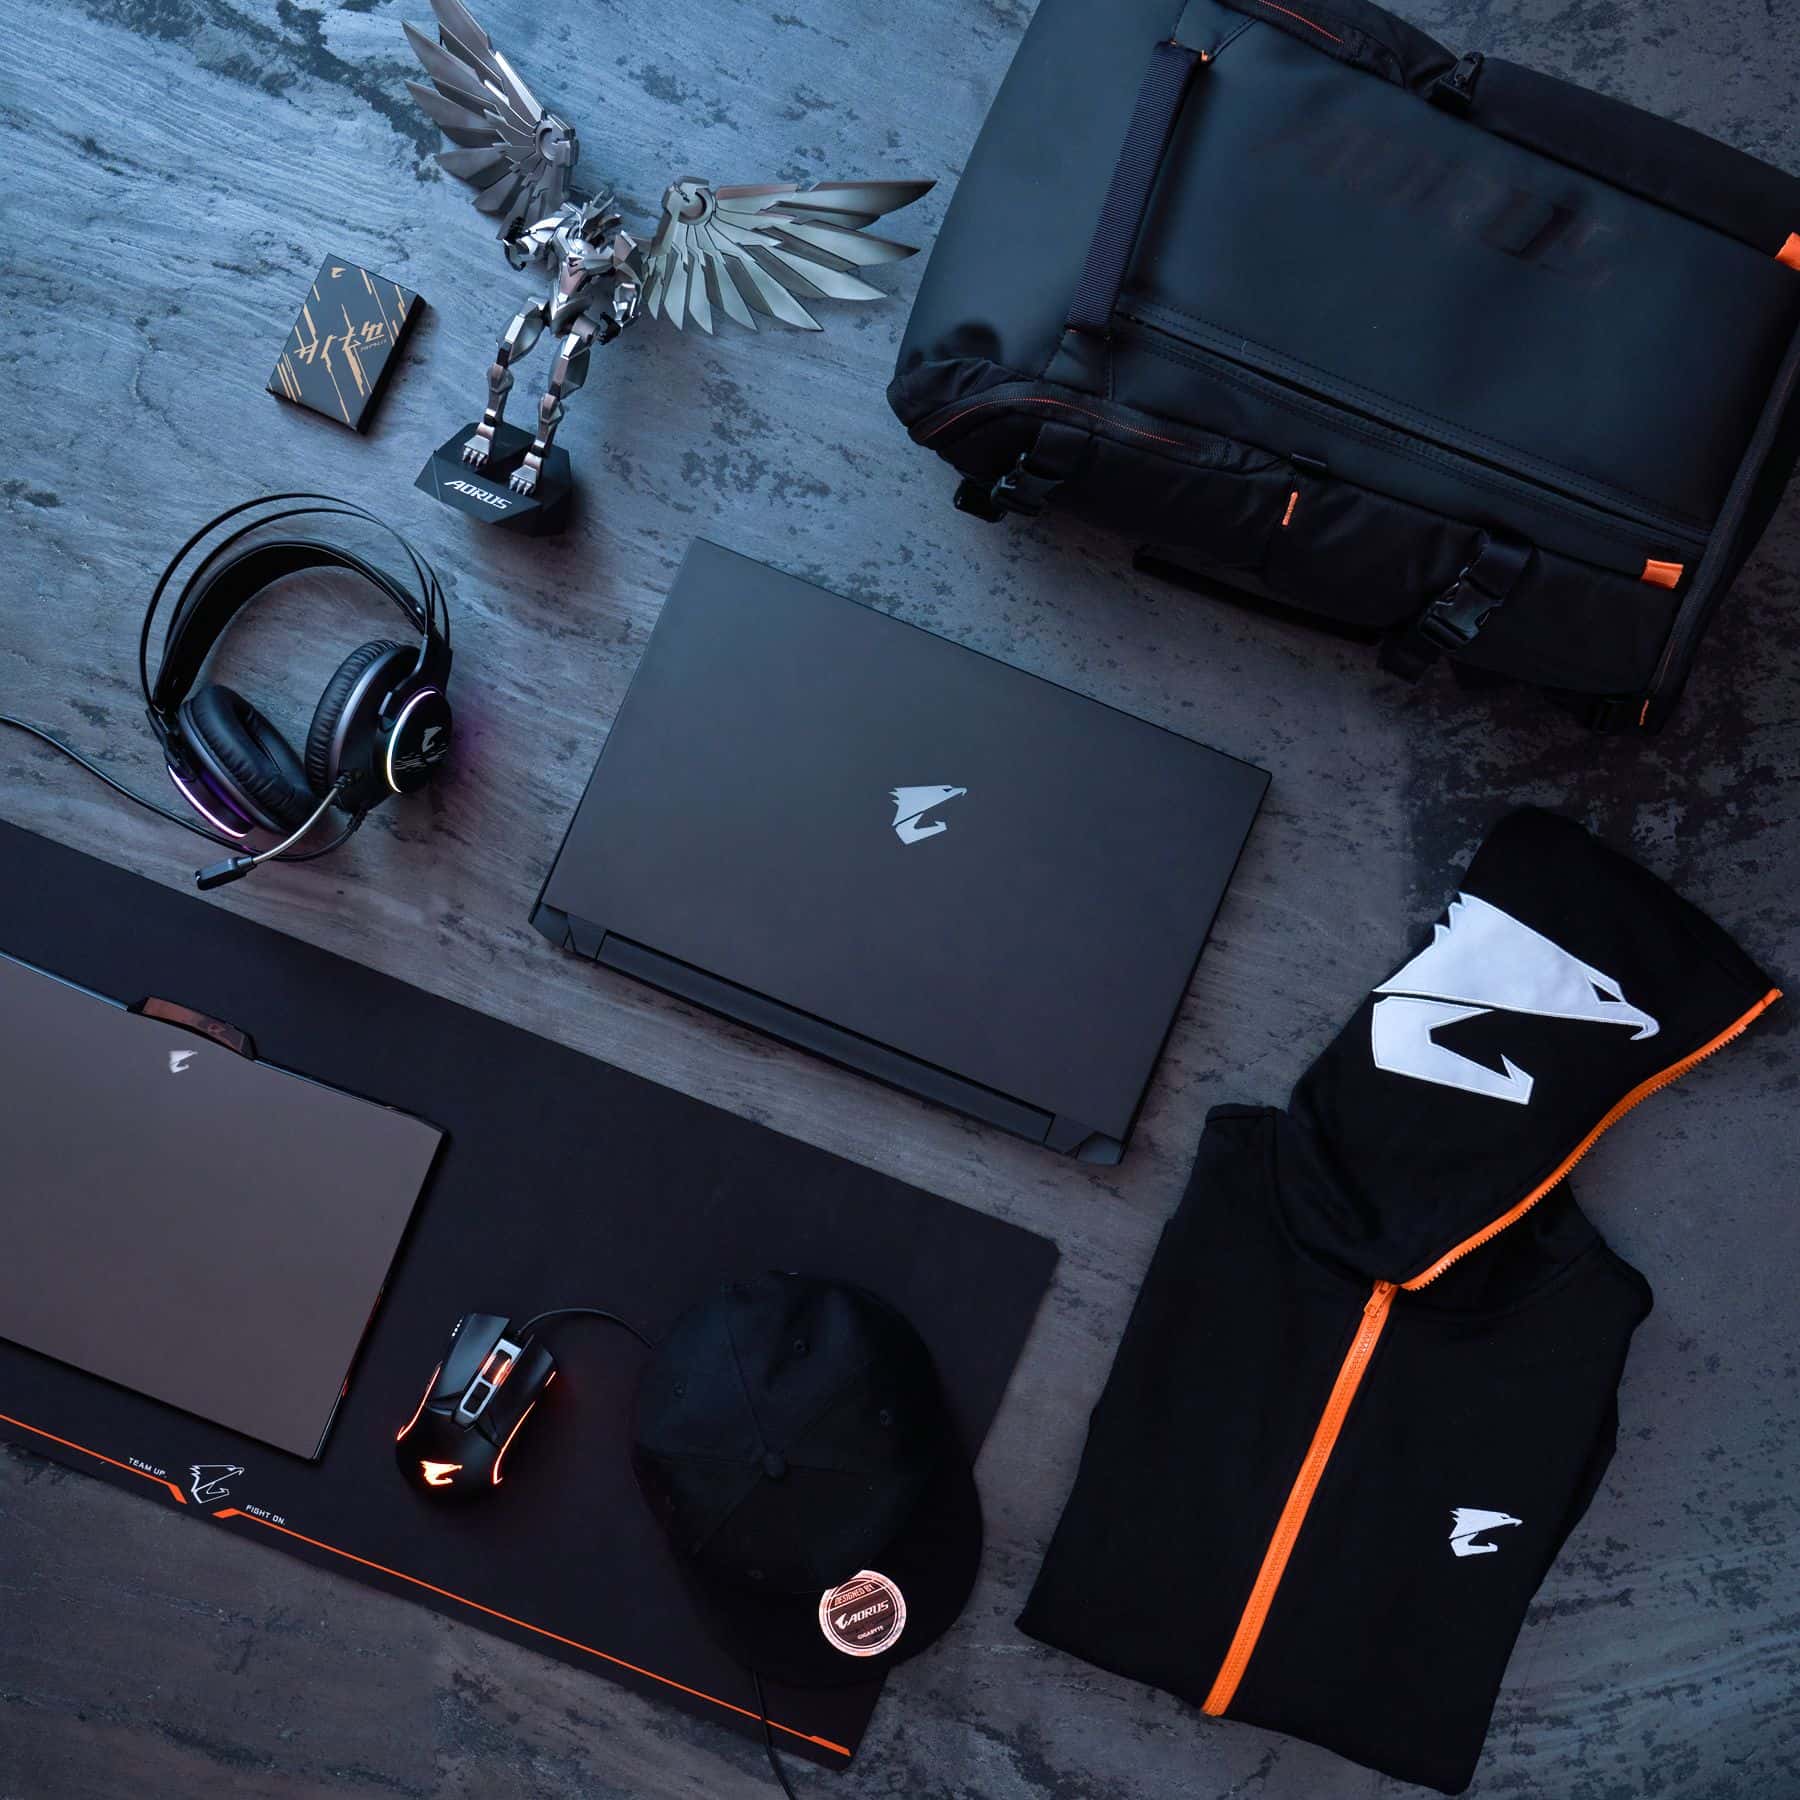 6 Things to Think About before Buying Your Gaming Laptop